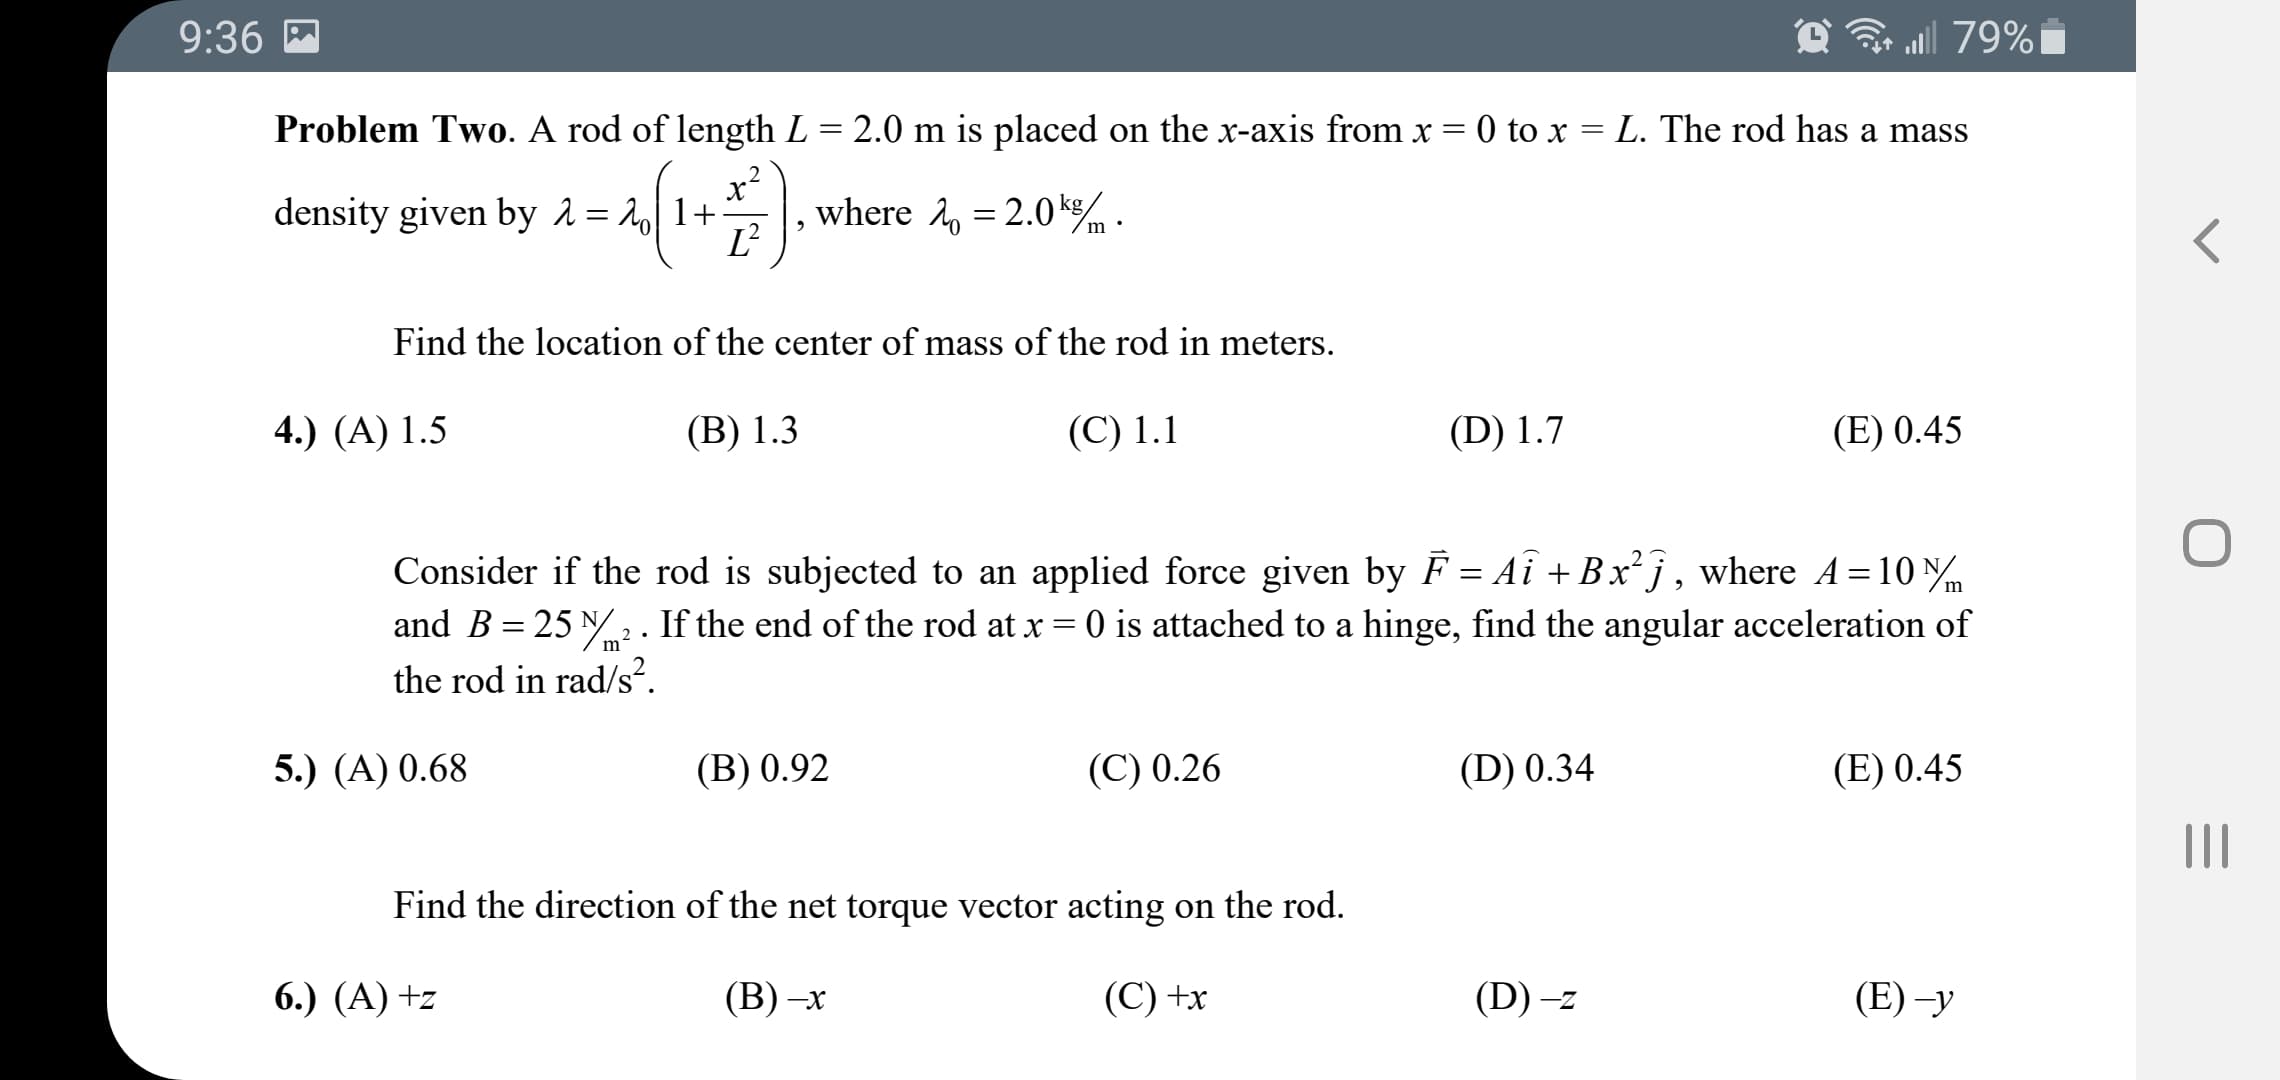 Problem Two. A rod of length L = 2.0 m is placed on the x-axis from x = 0 to x = L. The rod has a mass
density given by 2 = 2] 1+-
x-
where 2, = 2.0k.
L'
Find the location of the center of mass of the rod in meters.
4.) (A) 1.5
(B) 1.3
(С) 1.1
(D) 1.7
(E) 0.45
Consider if the rod is subjected to an applied force given by F = Aî +Bx²j , where A=10 N
and B = 25 N2 . If the end of the rod at x = 0 is attached to a hinge, find the angular acceleration of
the rod in rad/s².
m
5.) (A) 0.68
(B) 0.92
(C) 0.26
(D) 0.34
(E) 0.45
Find the direction of the net torque vector acting on the rod.
6.) (A) +z
(В) —х
(C) +x
(D) –z
(E) -у
